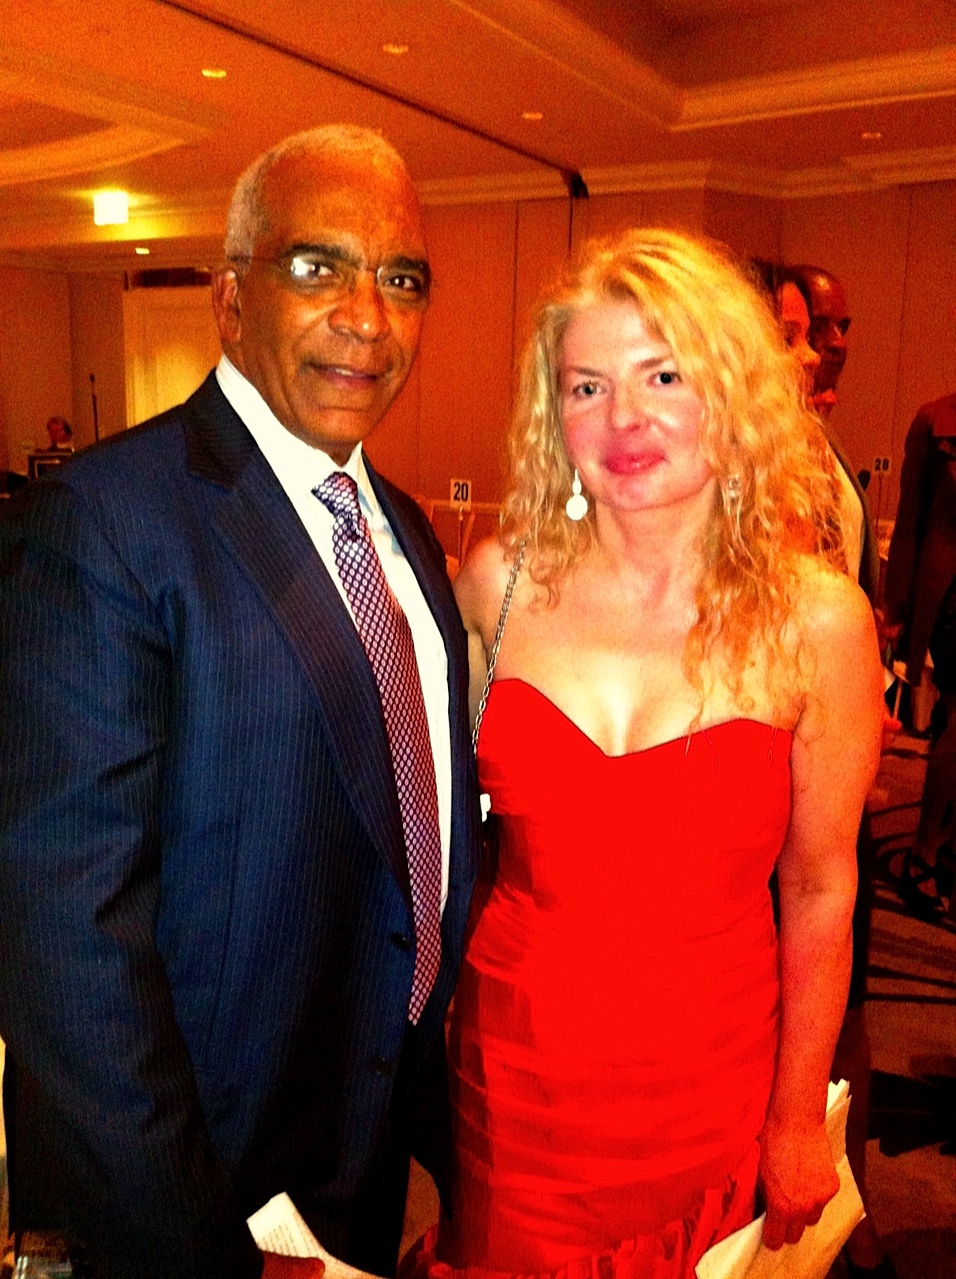 Adrienne Papp of Atlantic Publicity with Stan Lathan at the Annual Caucus for Producers, Writers and Directors, december 2012, LA, CA